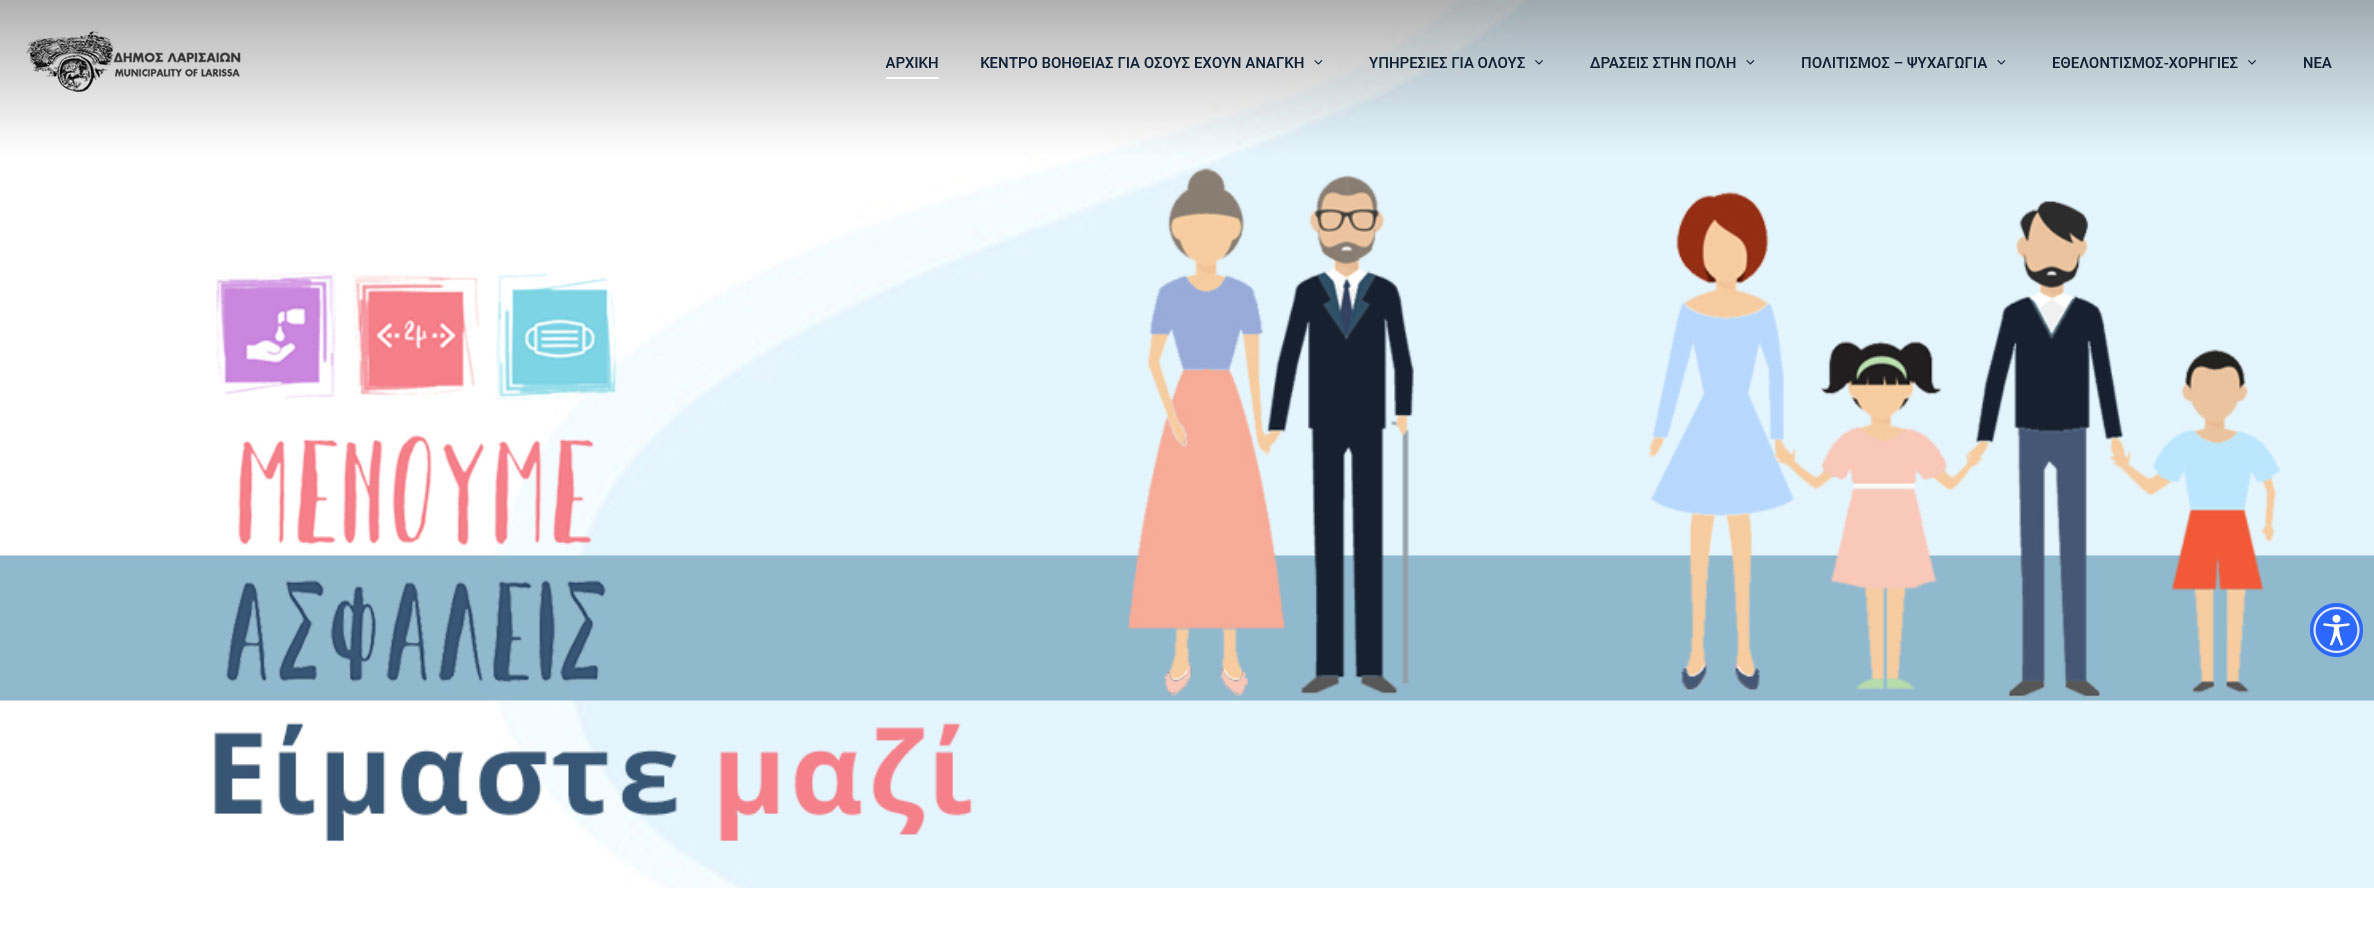 Larissamazi.gr - a website by the Municipality o Larissa (GR) to support citizens during the pandeminc